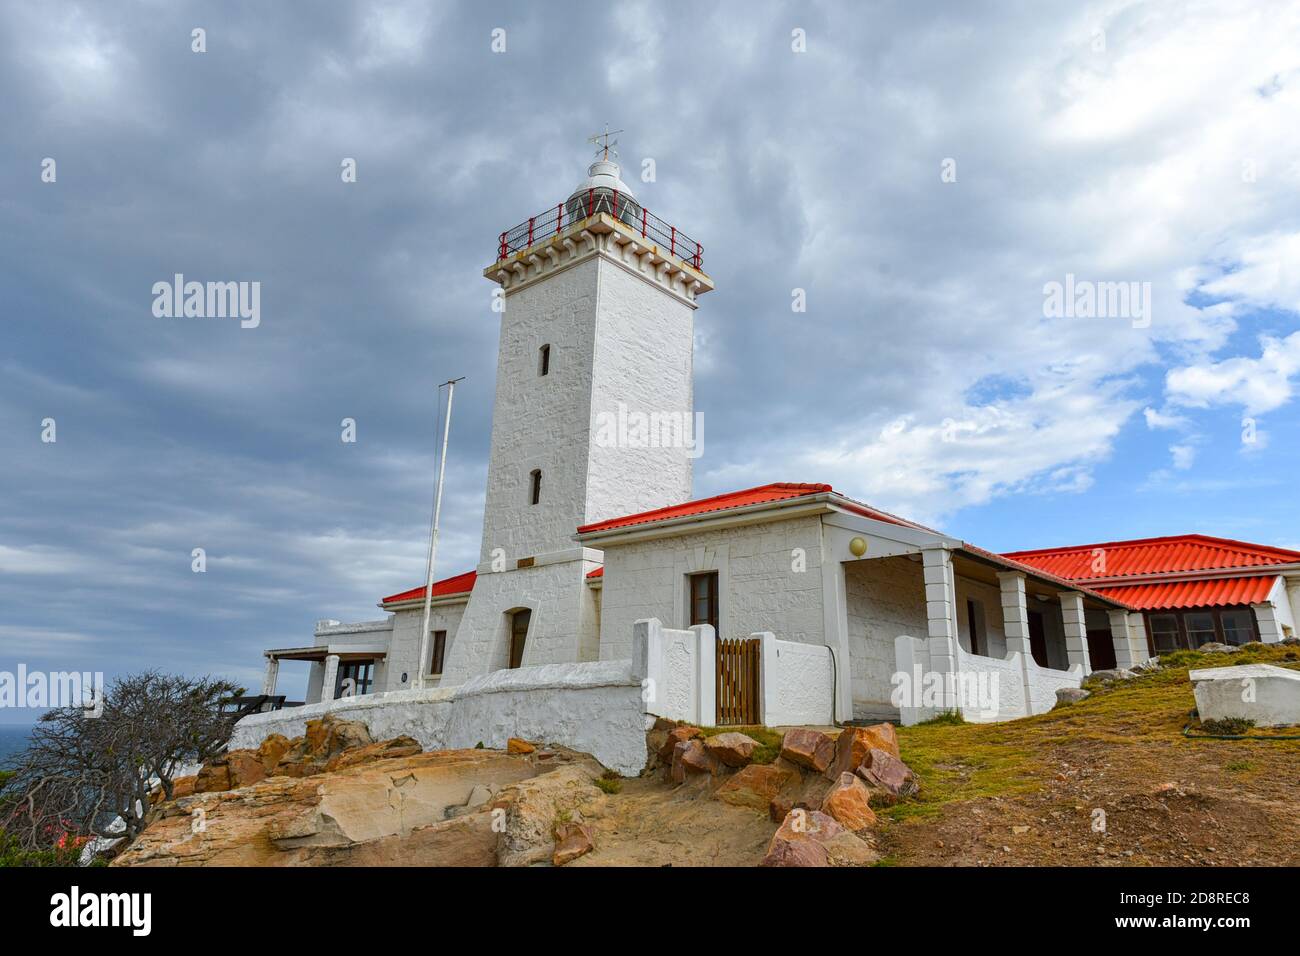 Cape St Blaize Lighthouse at Mossel Bay, Garden Route Africa is a magnificent landmark to see on the Garden Route, South Africa Stock Photo